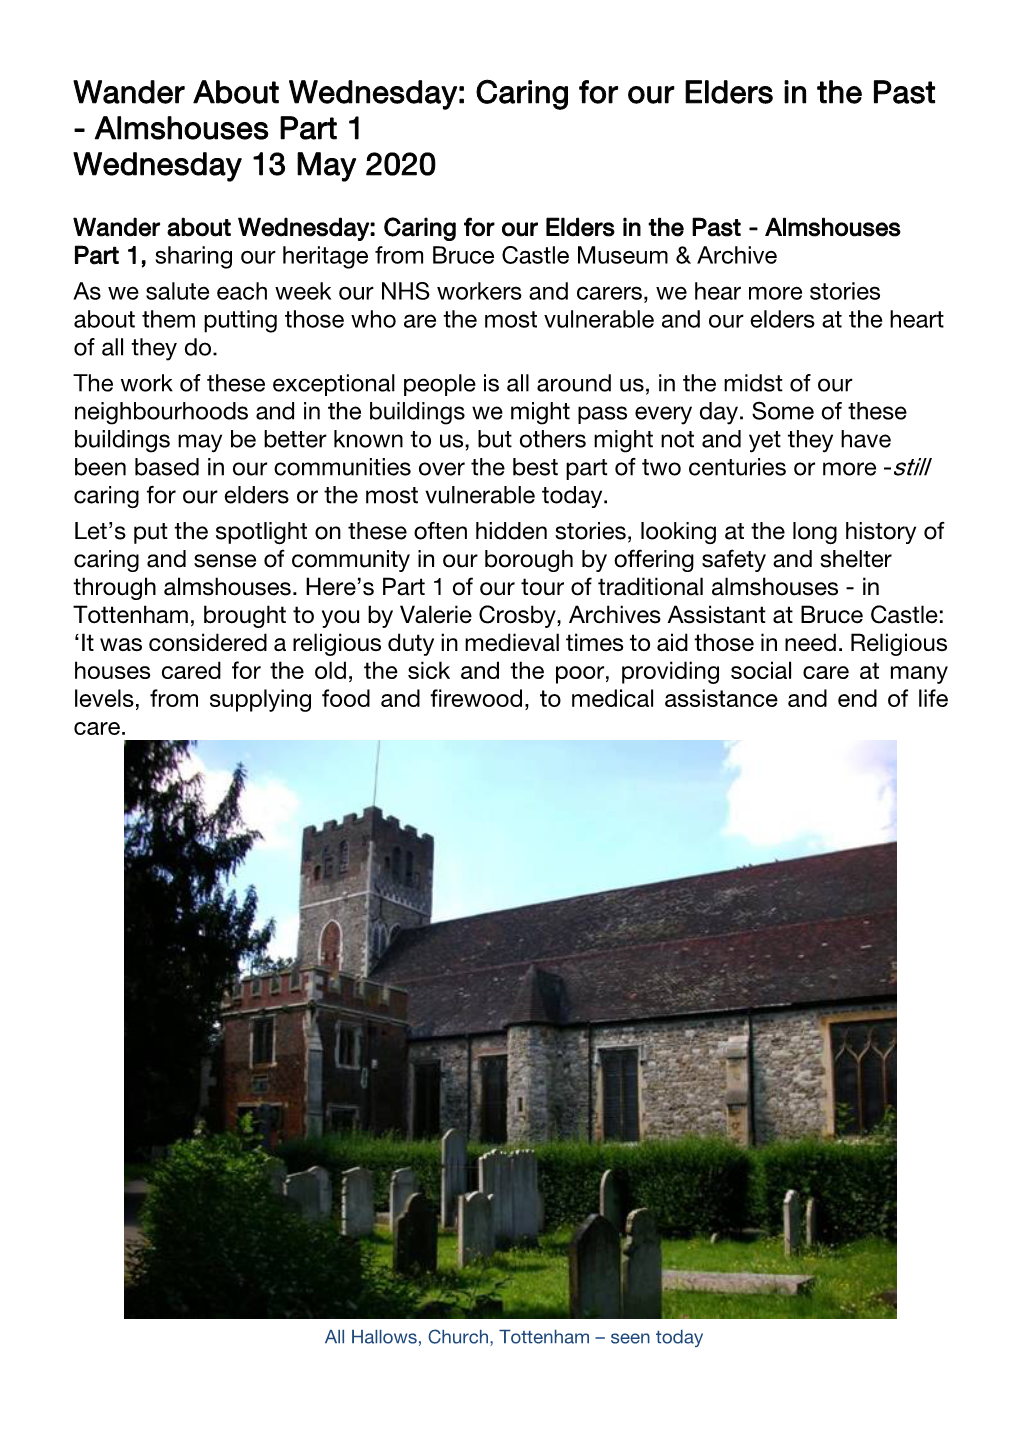 Wander About Wednesday: Caring for Our Elders in the Past - Almshouses Part 1 Wednesday 13 May 2020